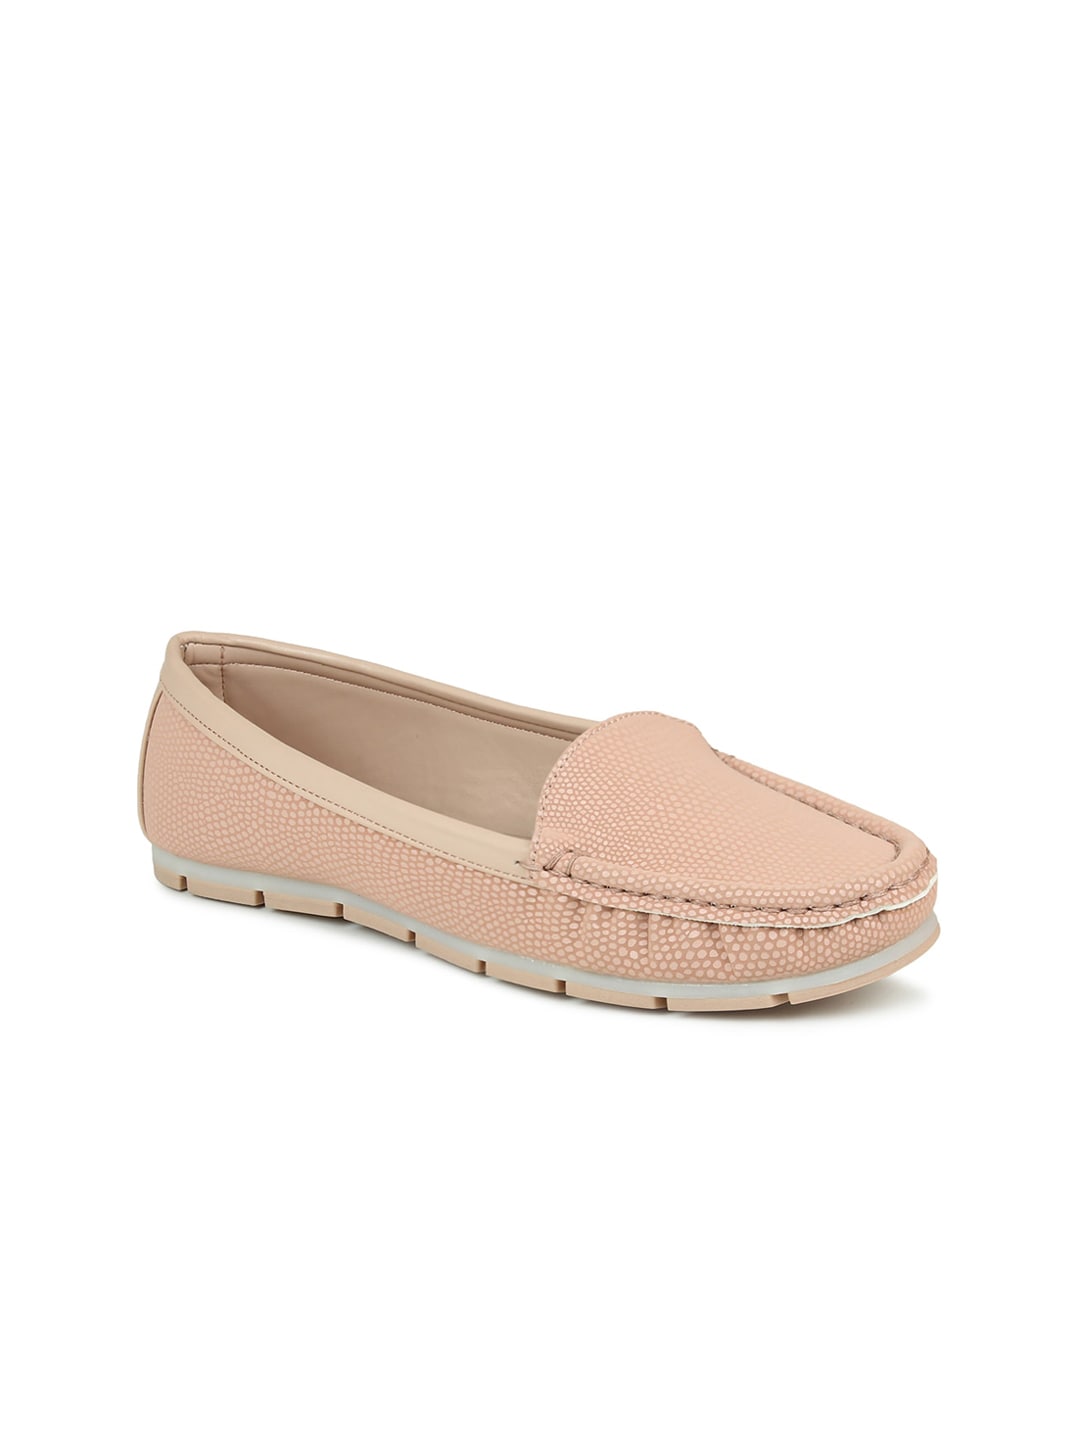 Inc 5 Women Peach-Coloured Solid Loafers Price in India